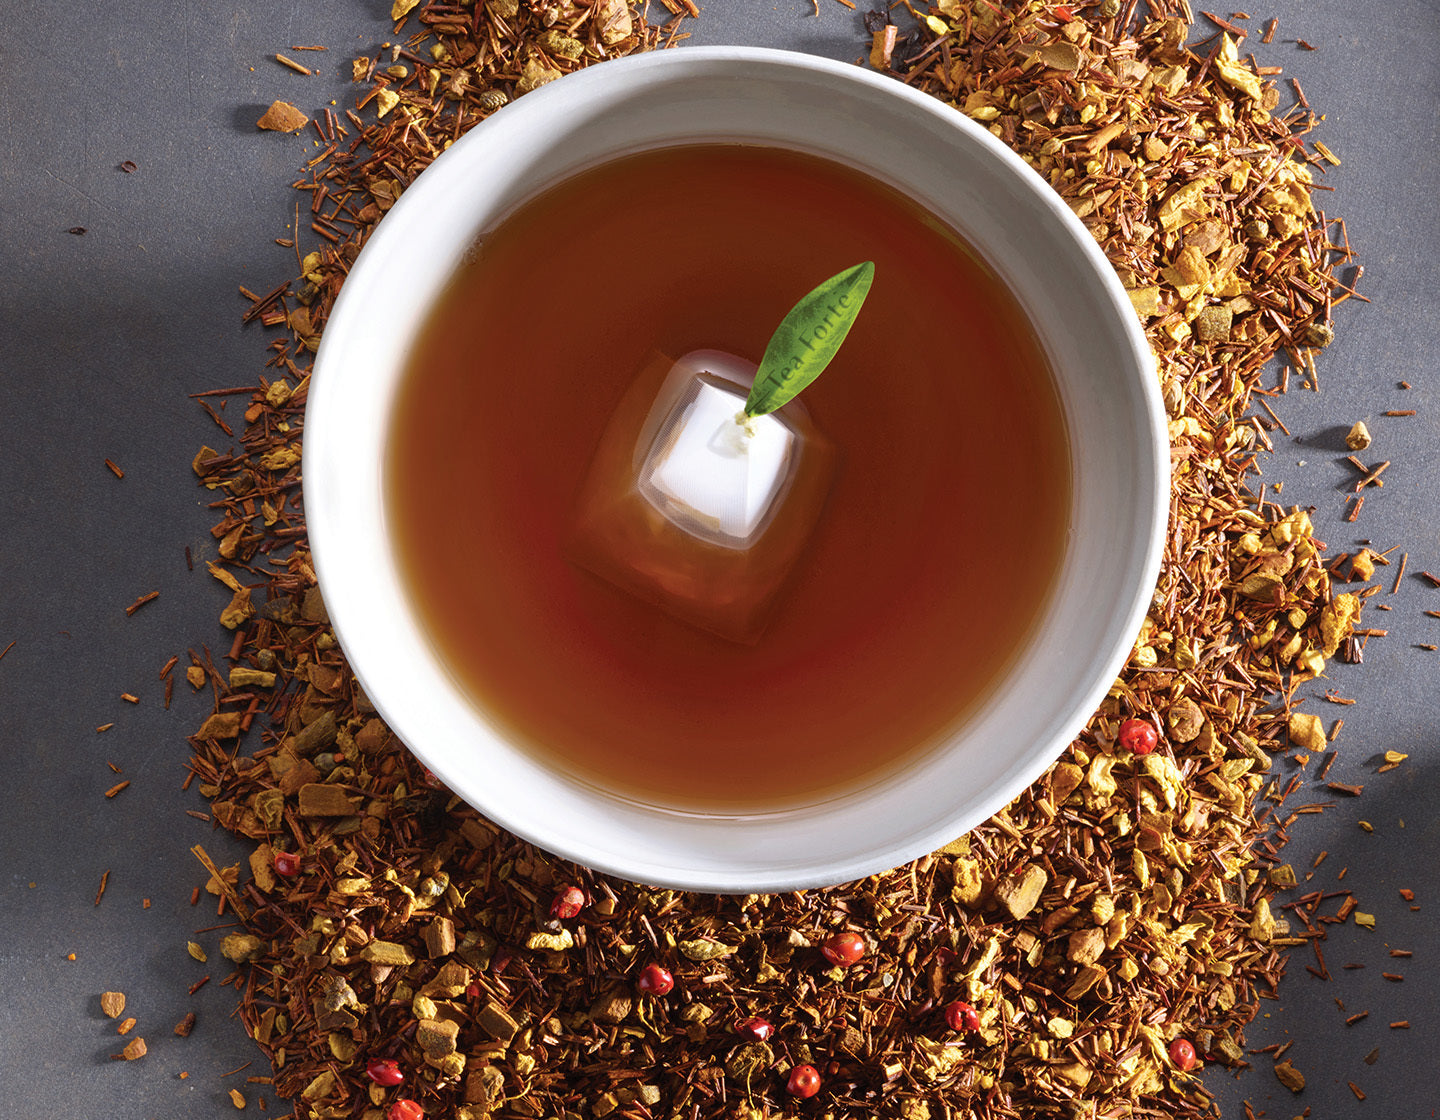 Cup of rooibos tea with a pyramid infuser inside, surrounded by loose leaf rooibos tea